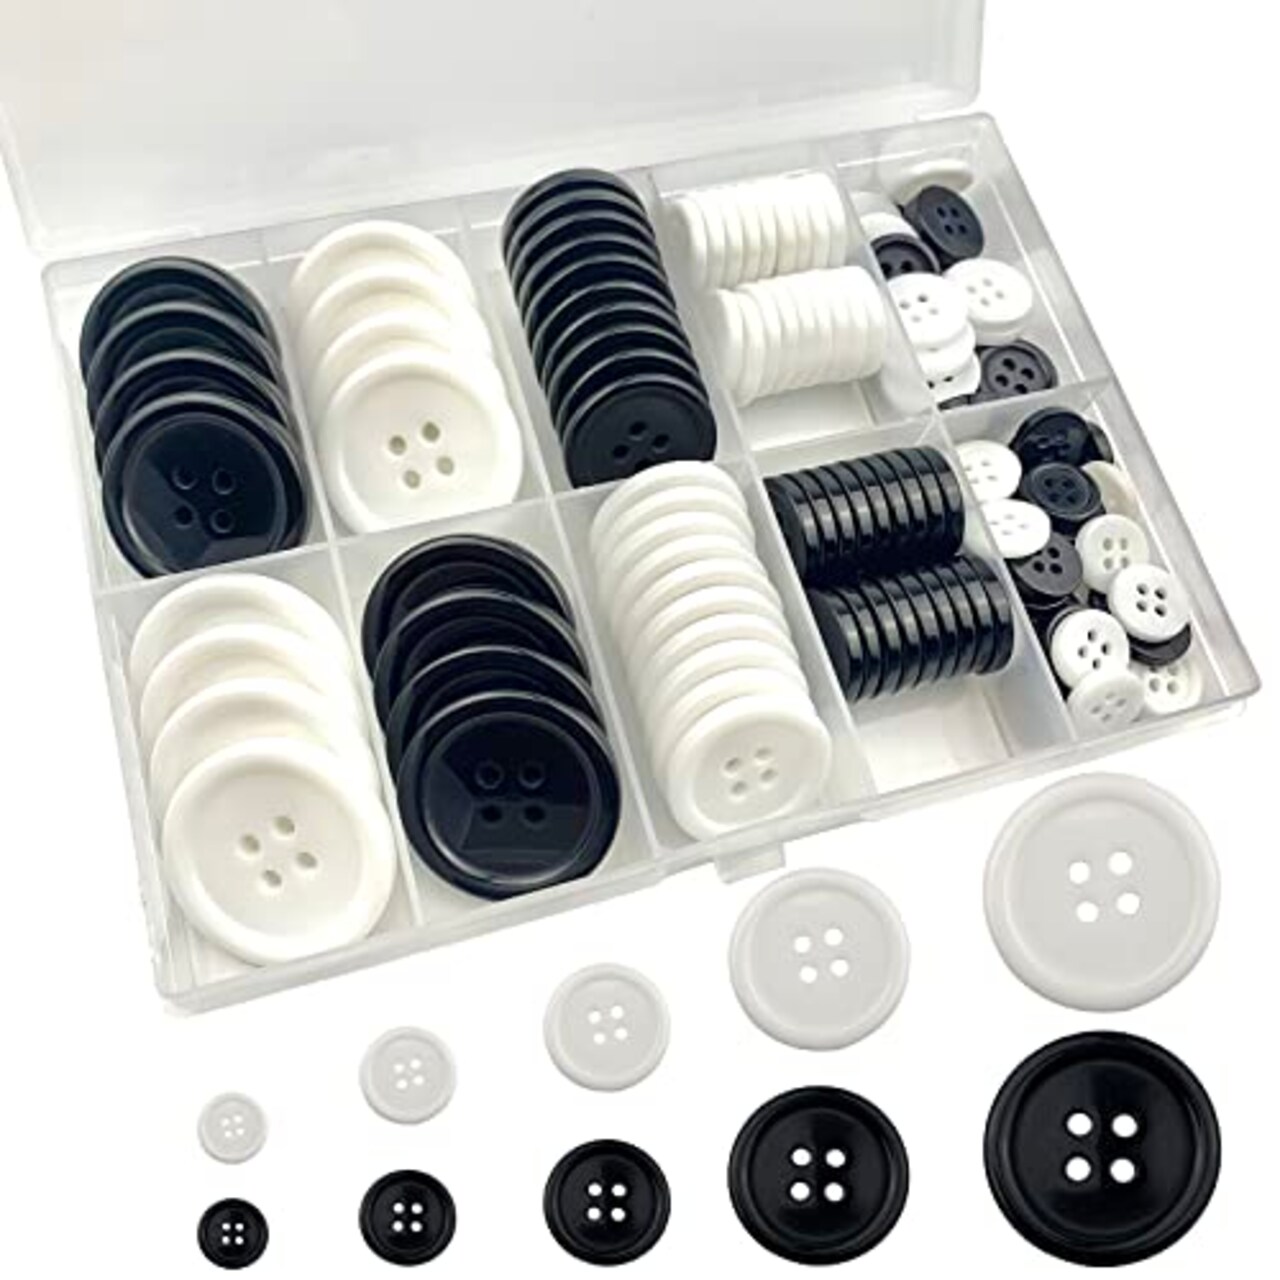 162 PCS Mixed Resin Sewing Buttons, Eco-Friendly 1 inch Buttons with  Compartmentalized Storage Box Black Buttons, 4 Holes 5 Sizes DIY White  Buttons, Suitable for Sewing, DIY and Holiday Decoration.